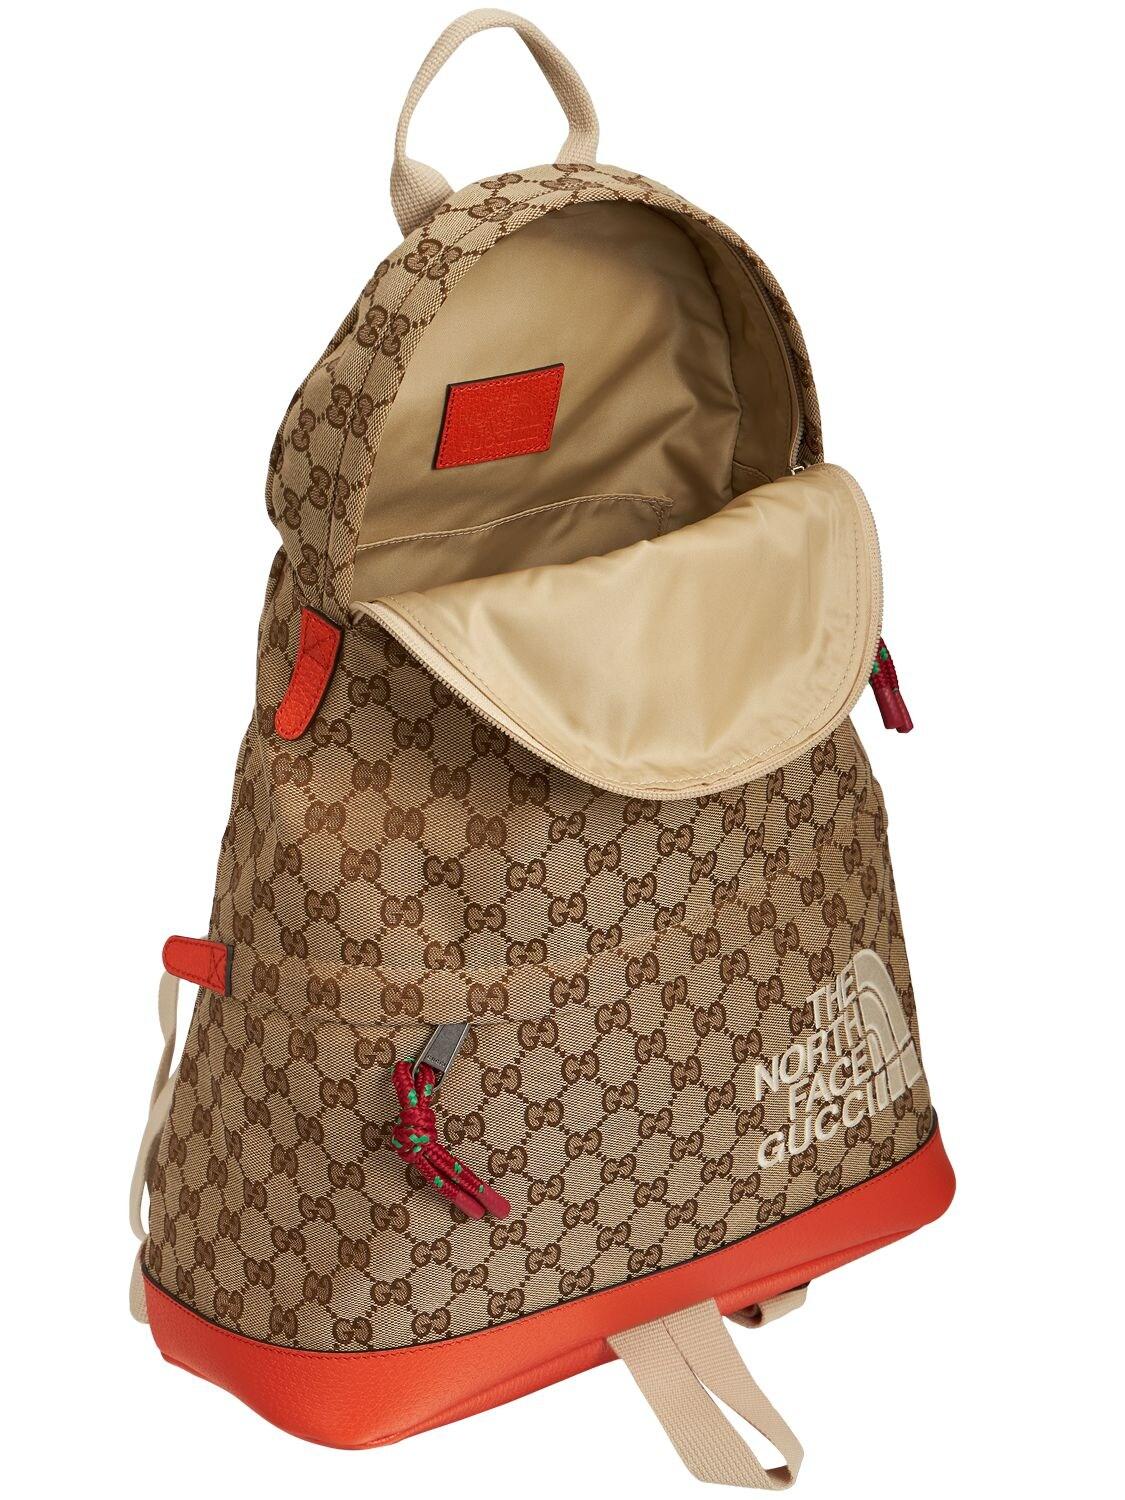 Gucci X The North Face Beige/Orange GG Canvas And Leather Backpack Gucci